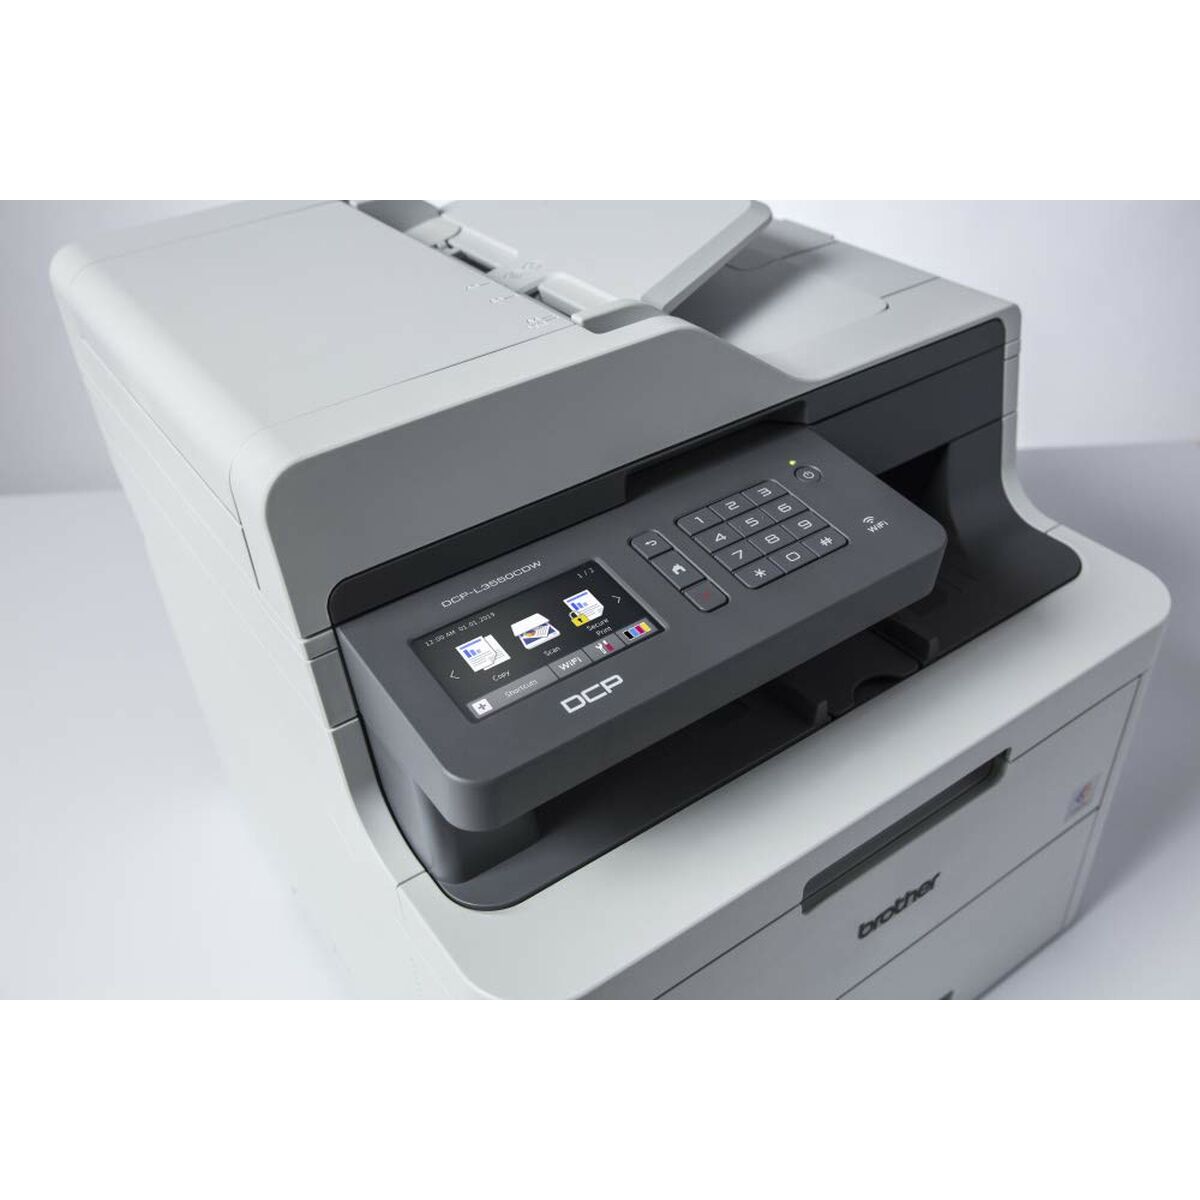 Brother MFC-L3750CDW Printer Review - Consumer Reports